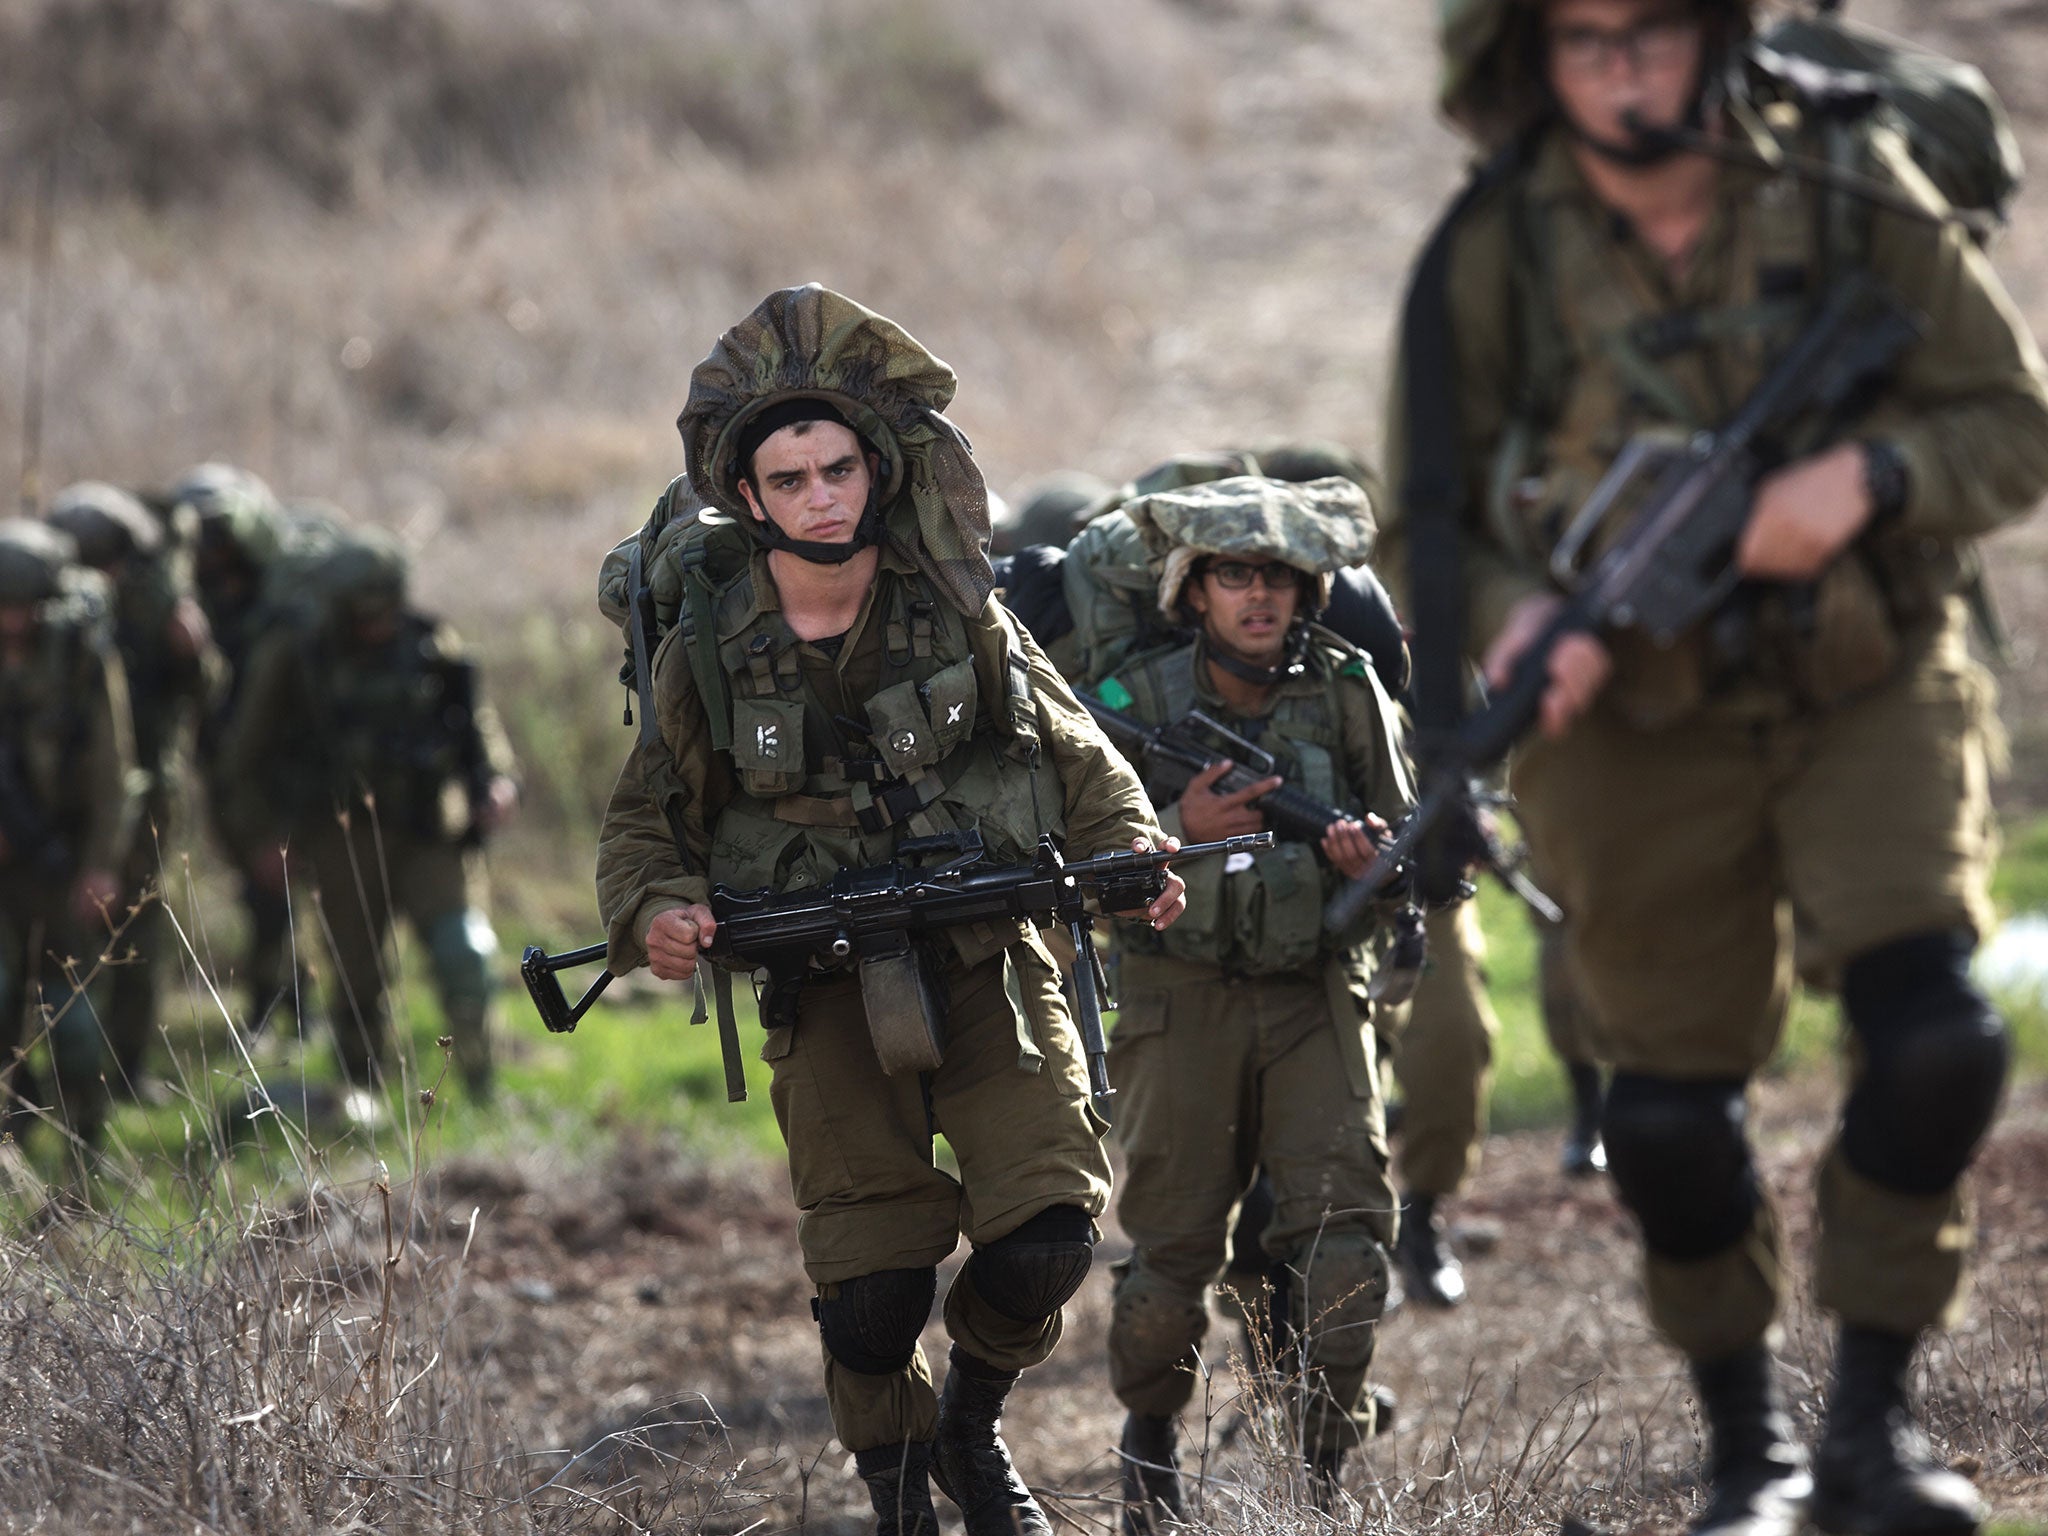 Israeli soldiers perform exercises in the Golan Heights. Stray rockets have occasionally – and apparently accidentally – struck across the border since the Syrian war began